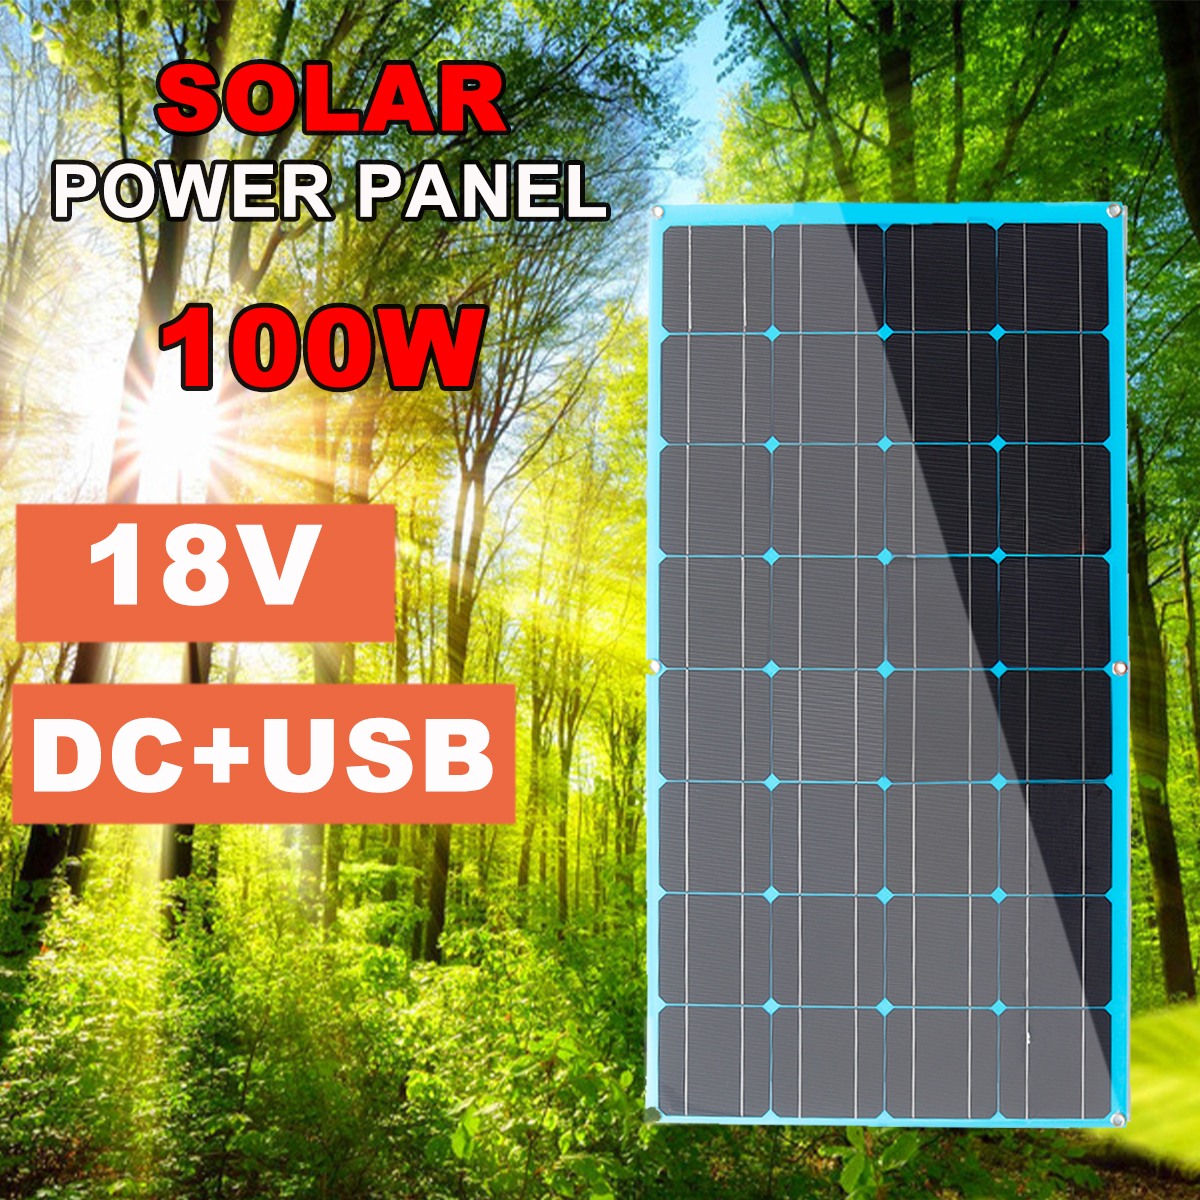 100W-18V-Polycrystalline-Solar-Panel-USBDC-Dual-Output-Battery-Charger-Portable-Camping-Travel-1856138-1